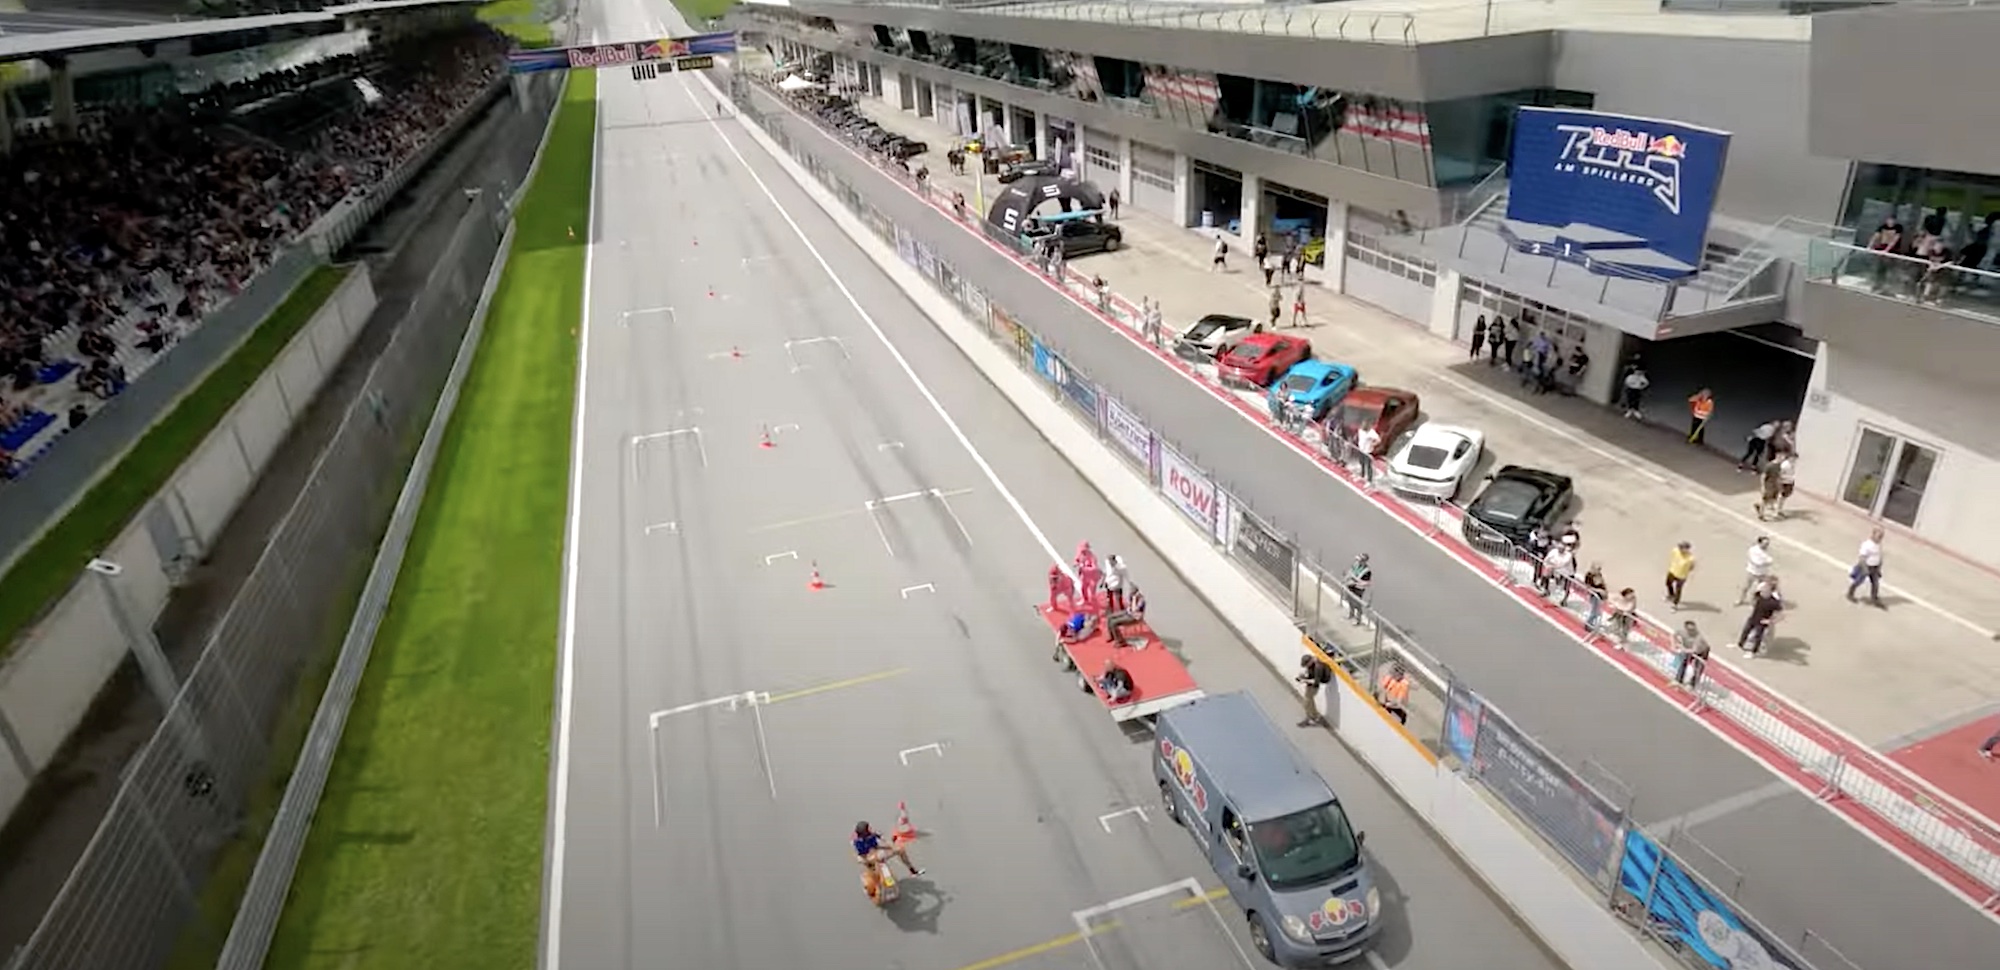 A view of the Austrians' Red Bull Ring, where over 30,000 gathered to watch a new record. Media sourced from Youtube.